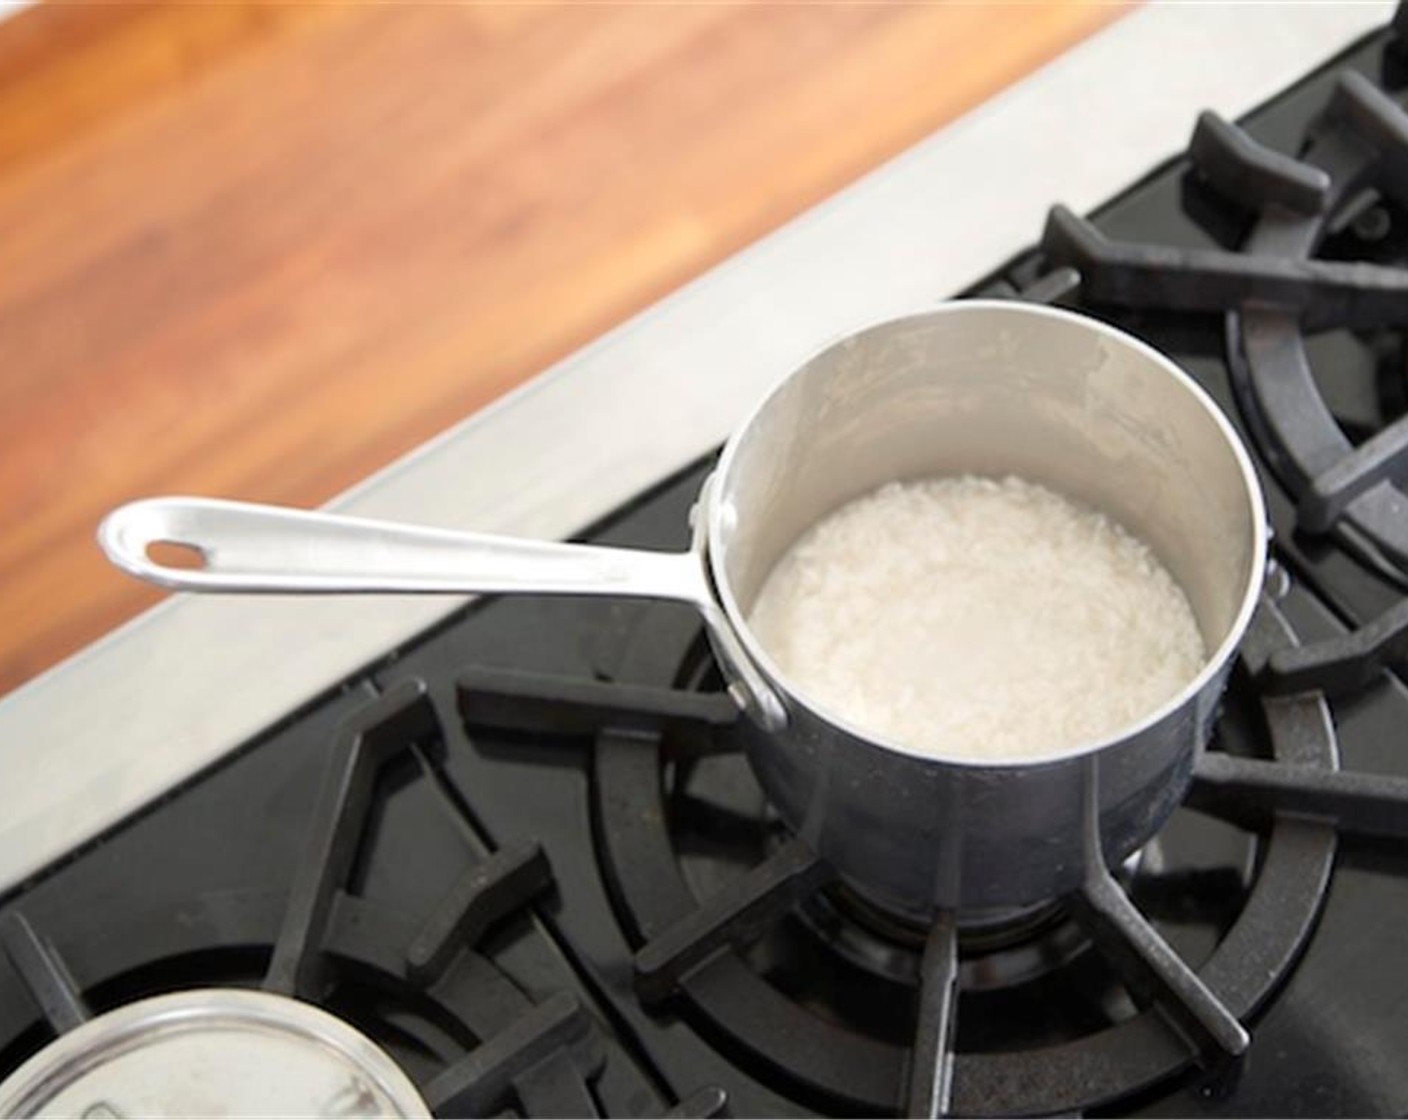 step 1 In a small saucepan, heat Jasmine Rice (2/3 cup) with one cup of cold water over high heat and stir. Bring to a boil, lower to a simmer, cover, and cook on low for fifteen minutes or until all water has been absorbed. Fluff rice with a fork and keep covered.